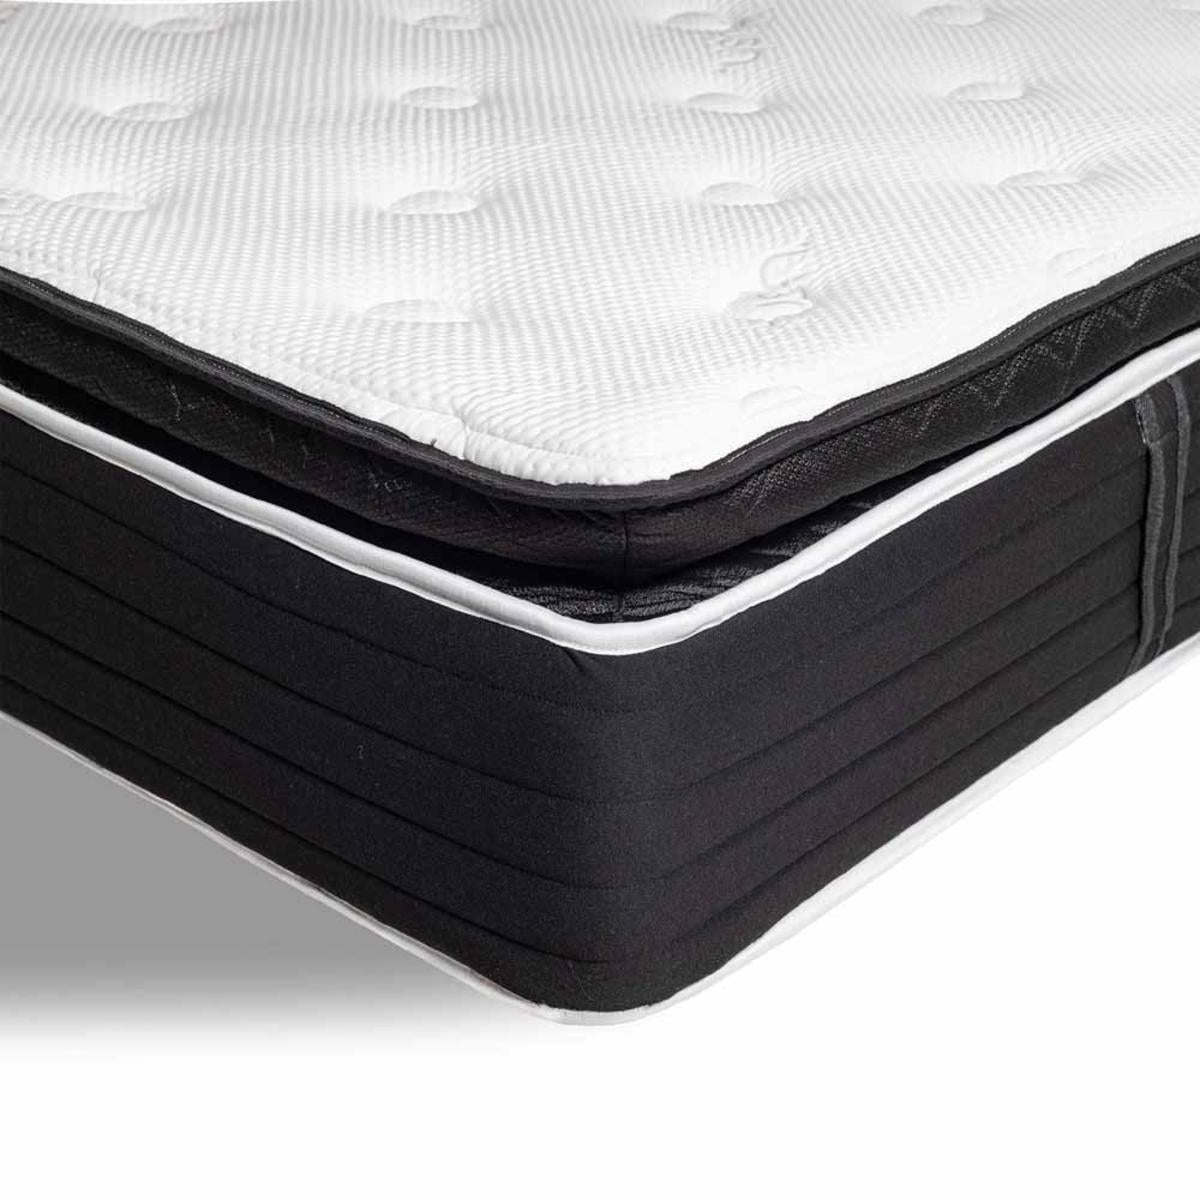 Hush Iced Hybrid 2-in-1 Cooling Mattress with Memory Foam and Springs - Queen/White